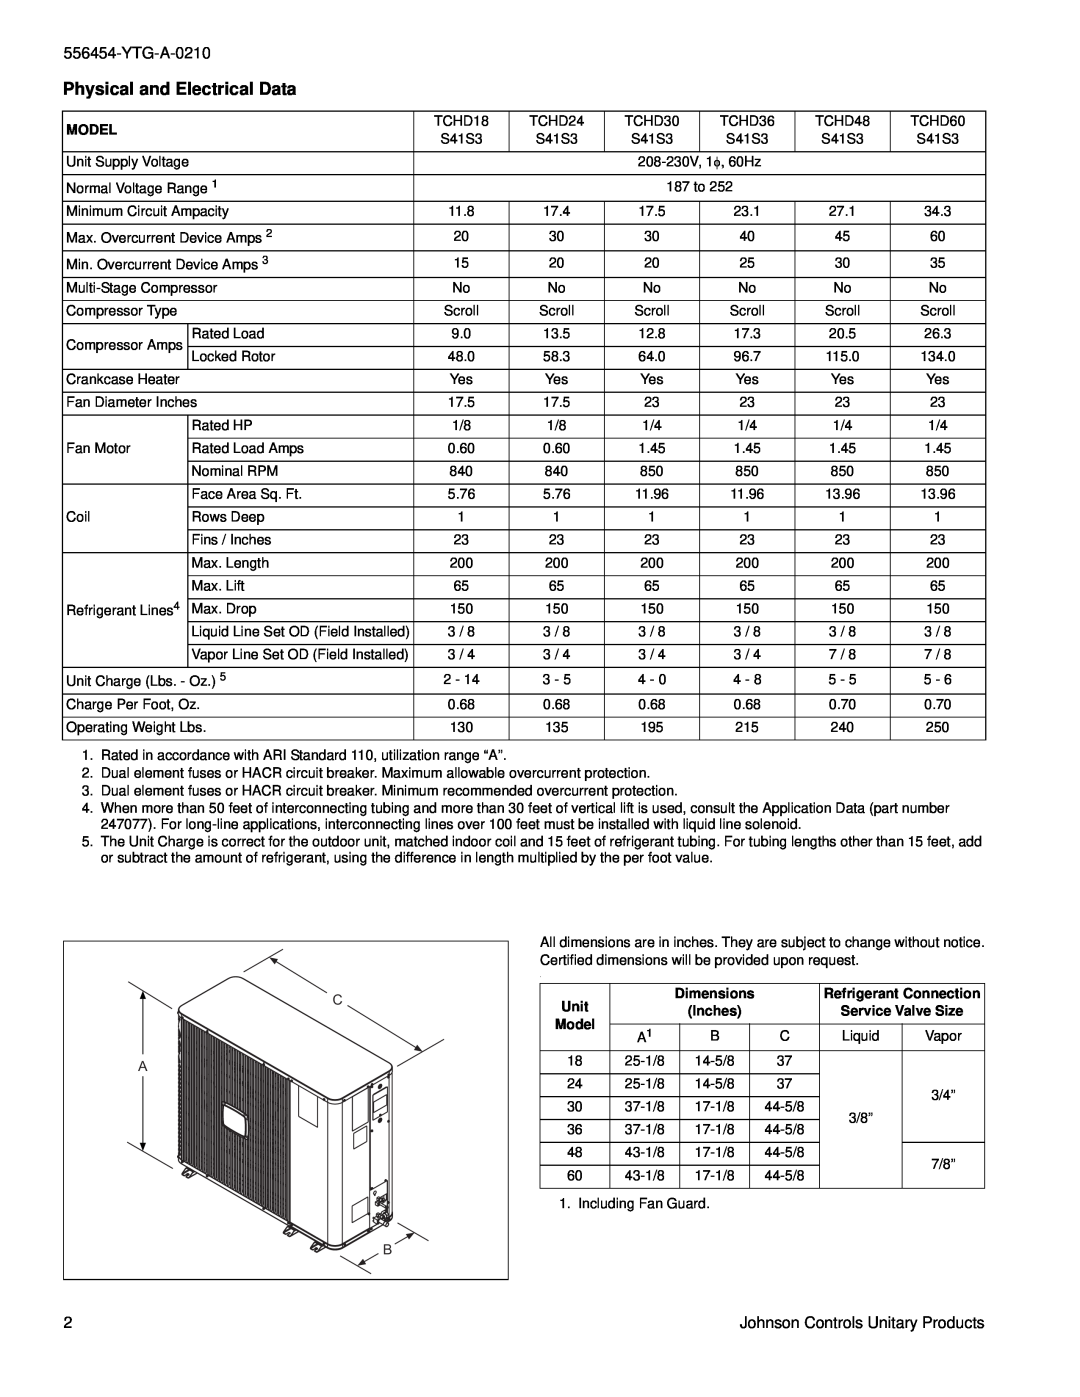 York TCHD18 THRU 60 Physical and Electrical Data, YTG-A-0210, Johnson Controls Unitary Products, Model, Service Valve Size 